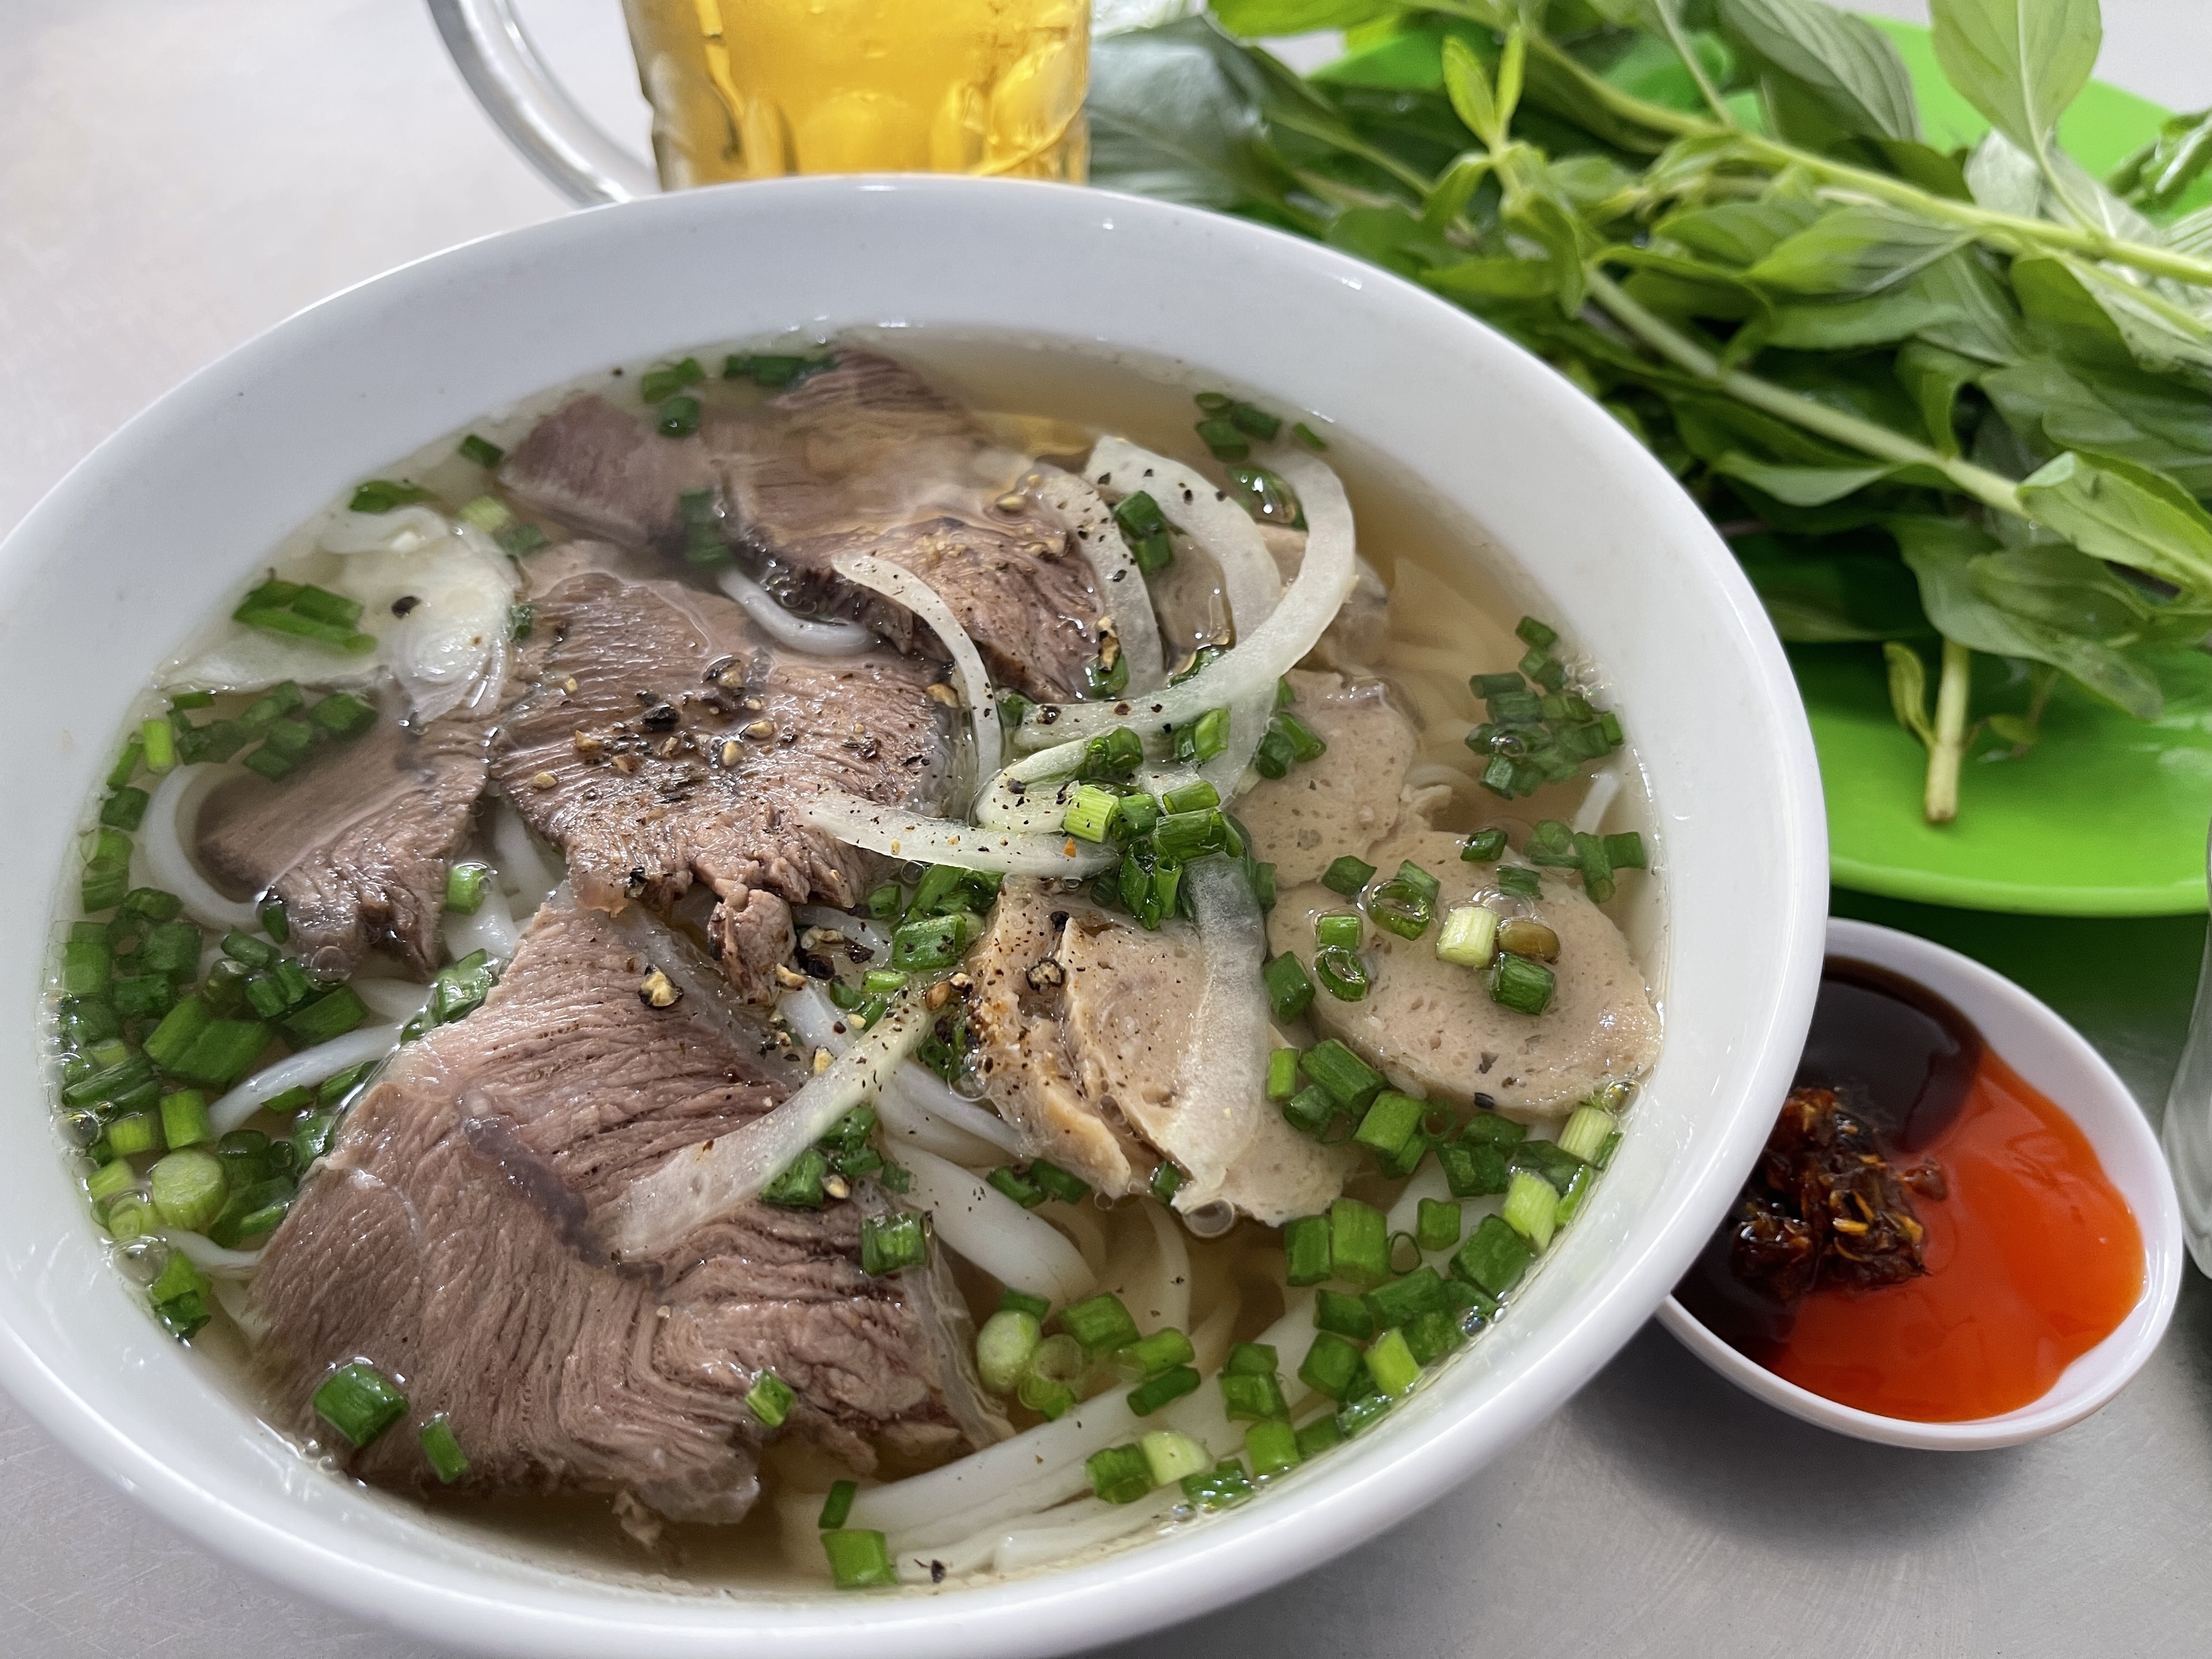 Vietnam cuisine: No matter what 'pho' you crave, try it and you’ll like it!